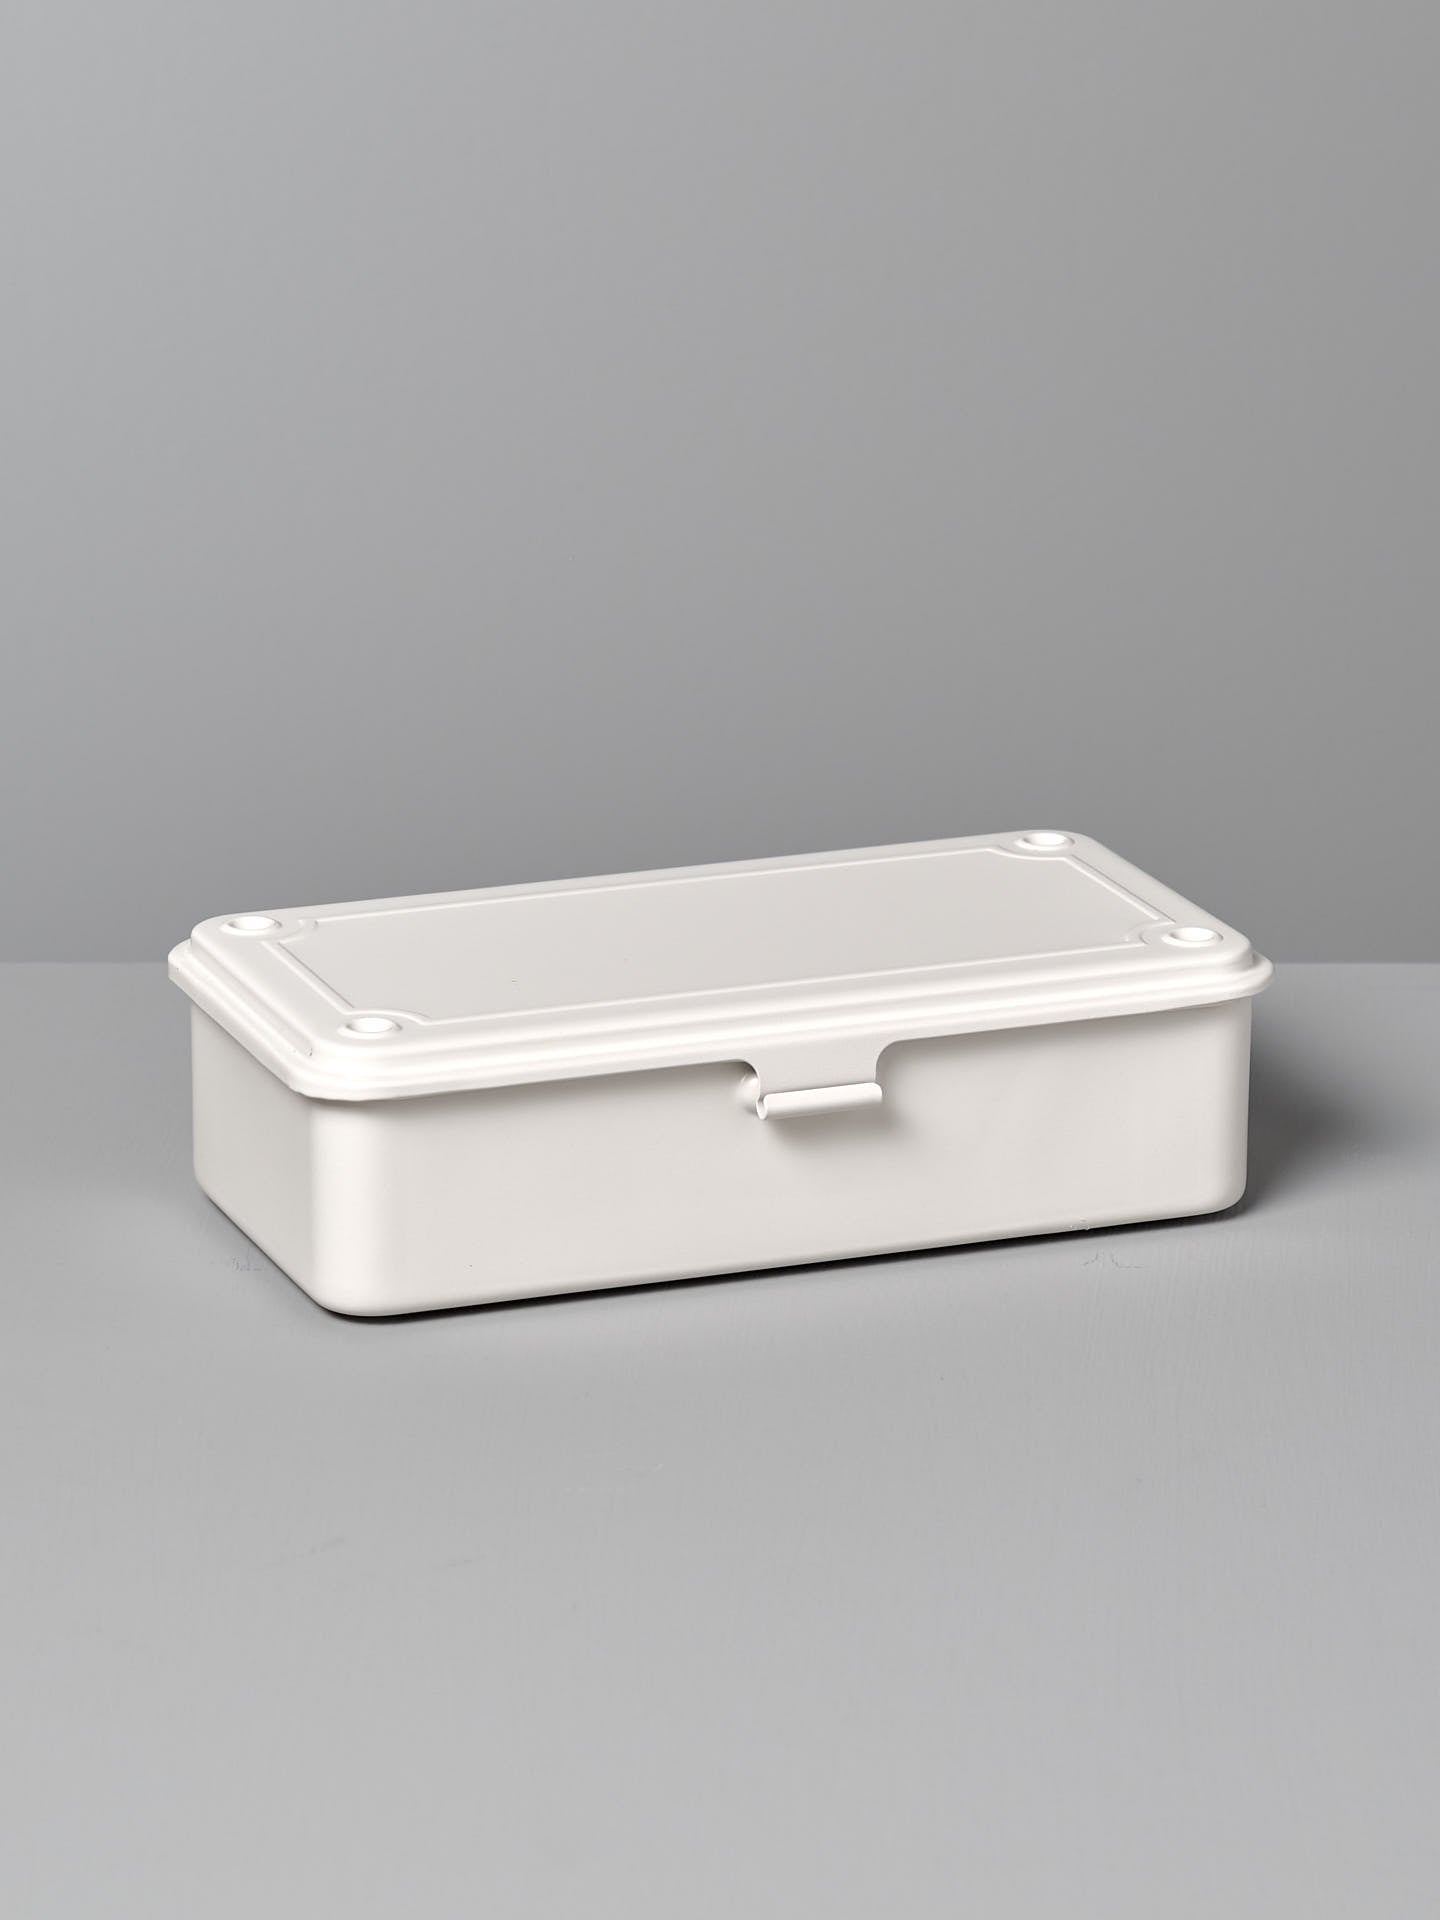 A Mini Steel Toolbox T-190 – White from TOYO STEEL with a closed lid, placed on a gray surface against a gray background.